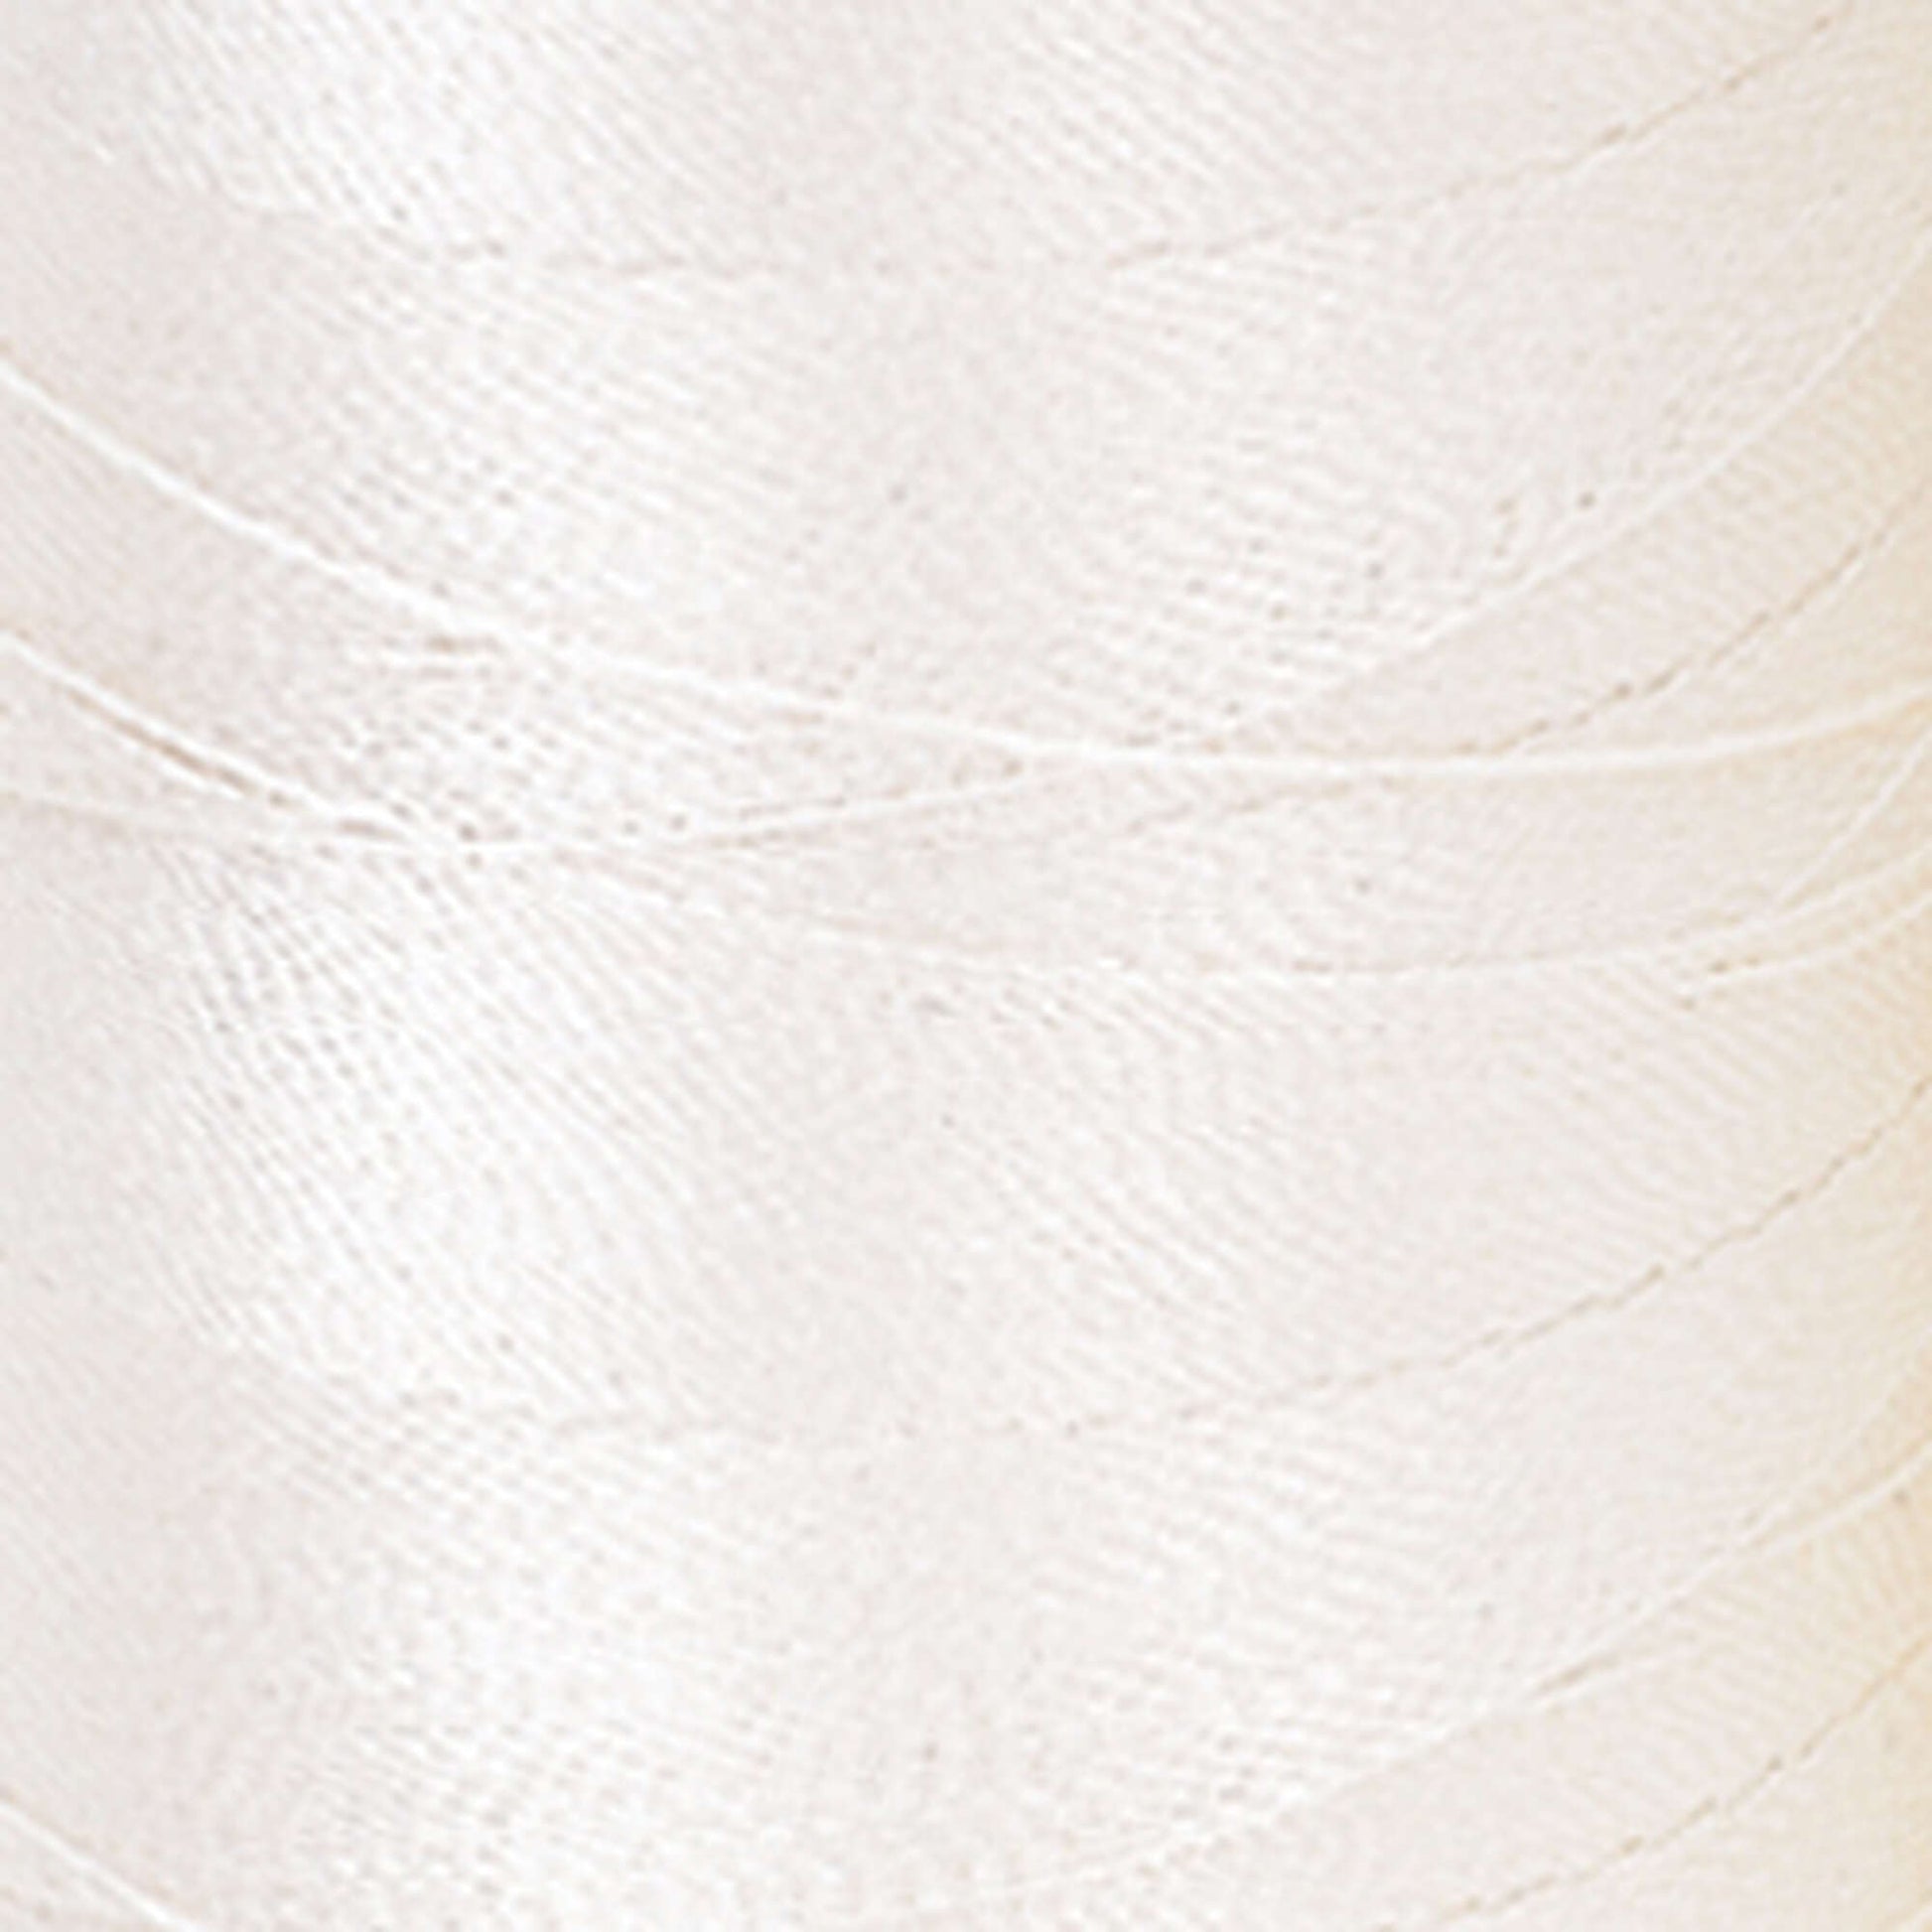 Coats & Clark Trilobal Embroidery Thread 1100 yd Winter White